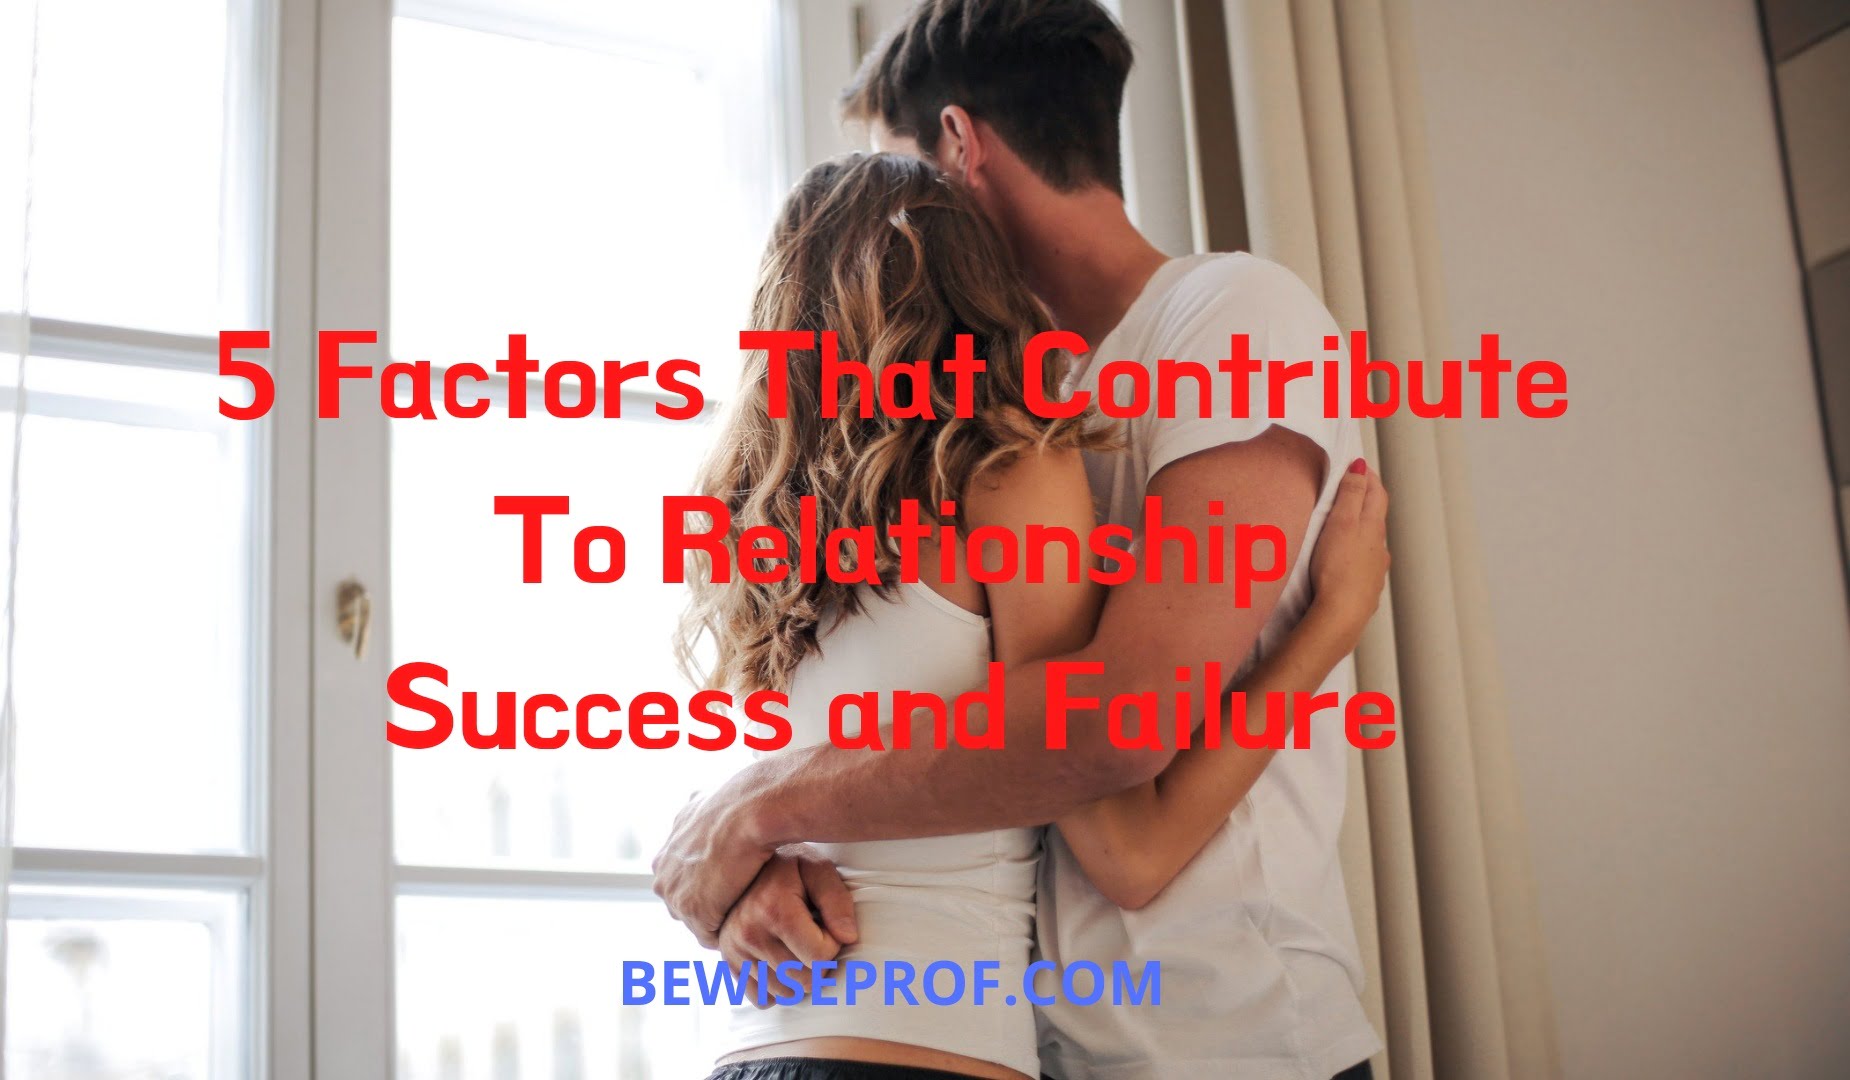 5 Factors That Contribute To Relationship Success and Failure